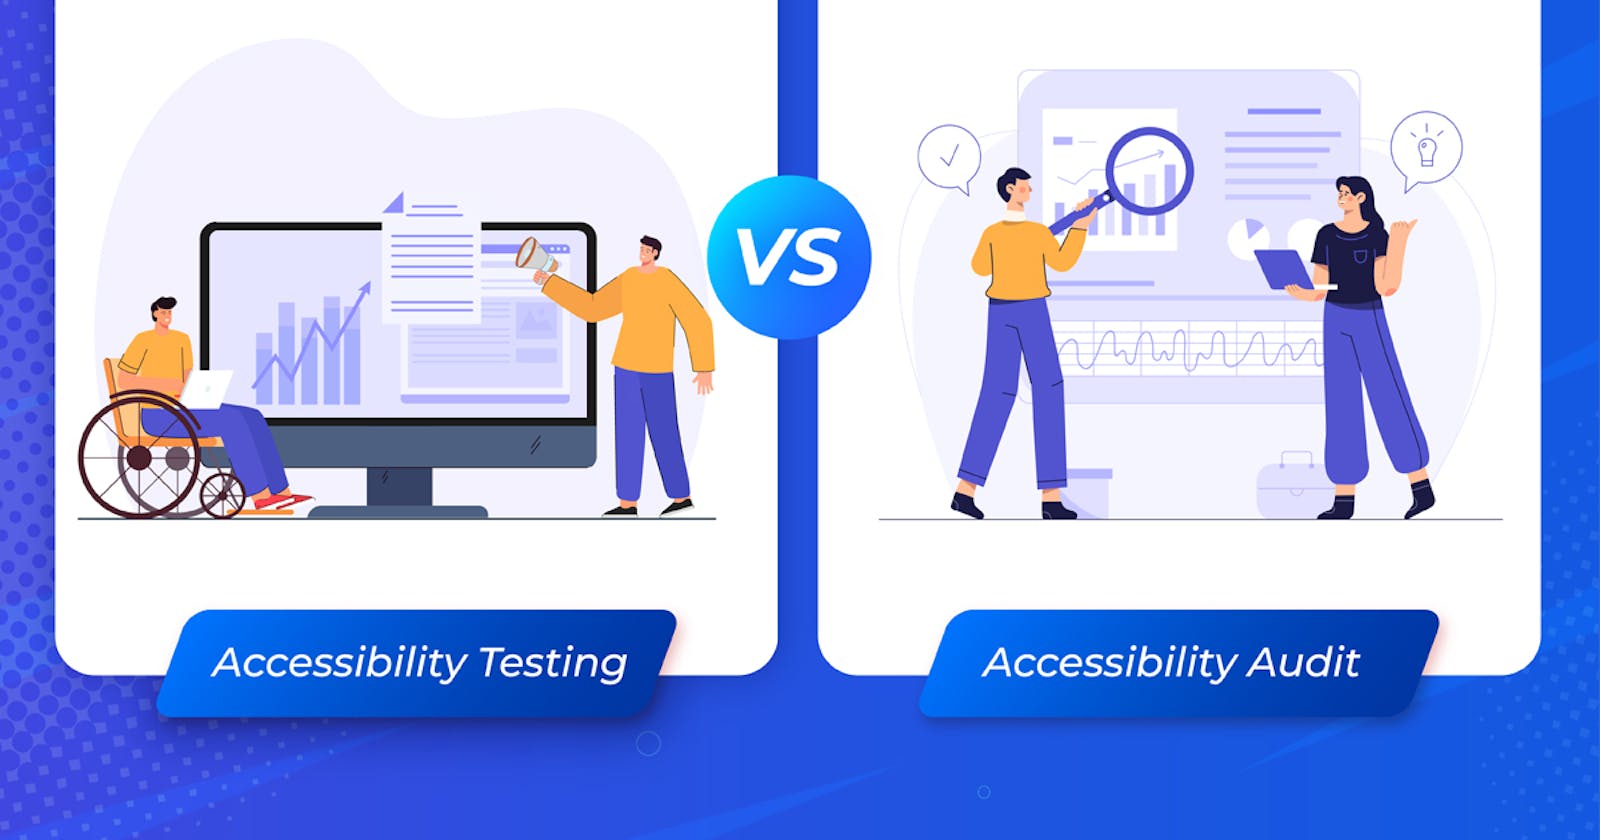 Accessibility Testing vs Audit: What's the Difference